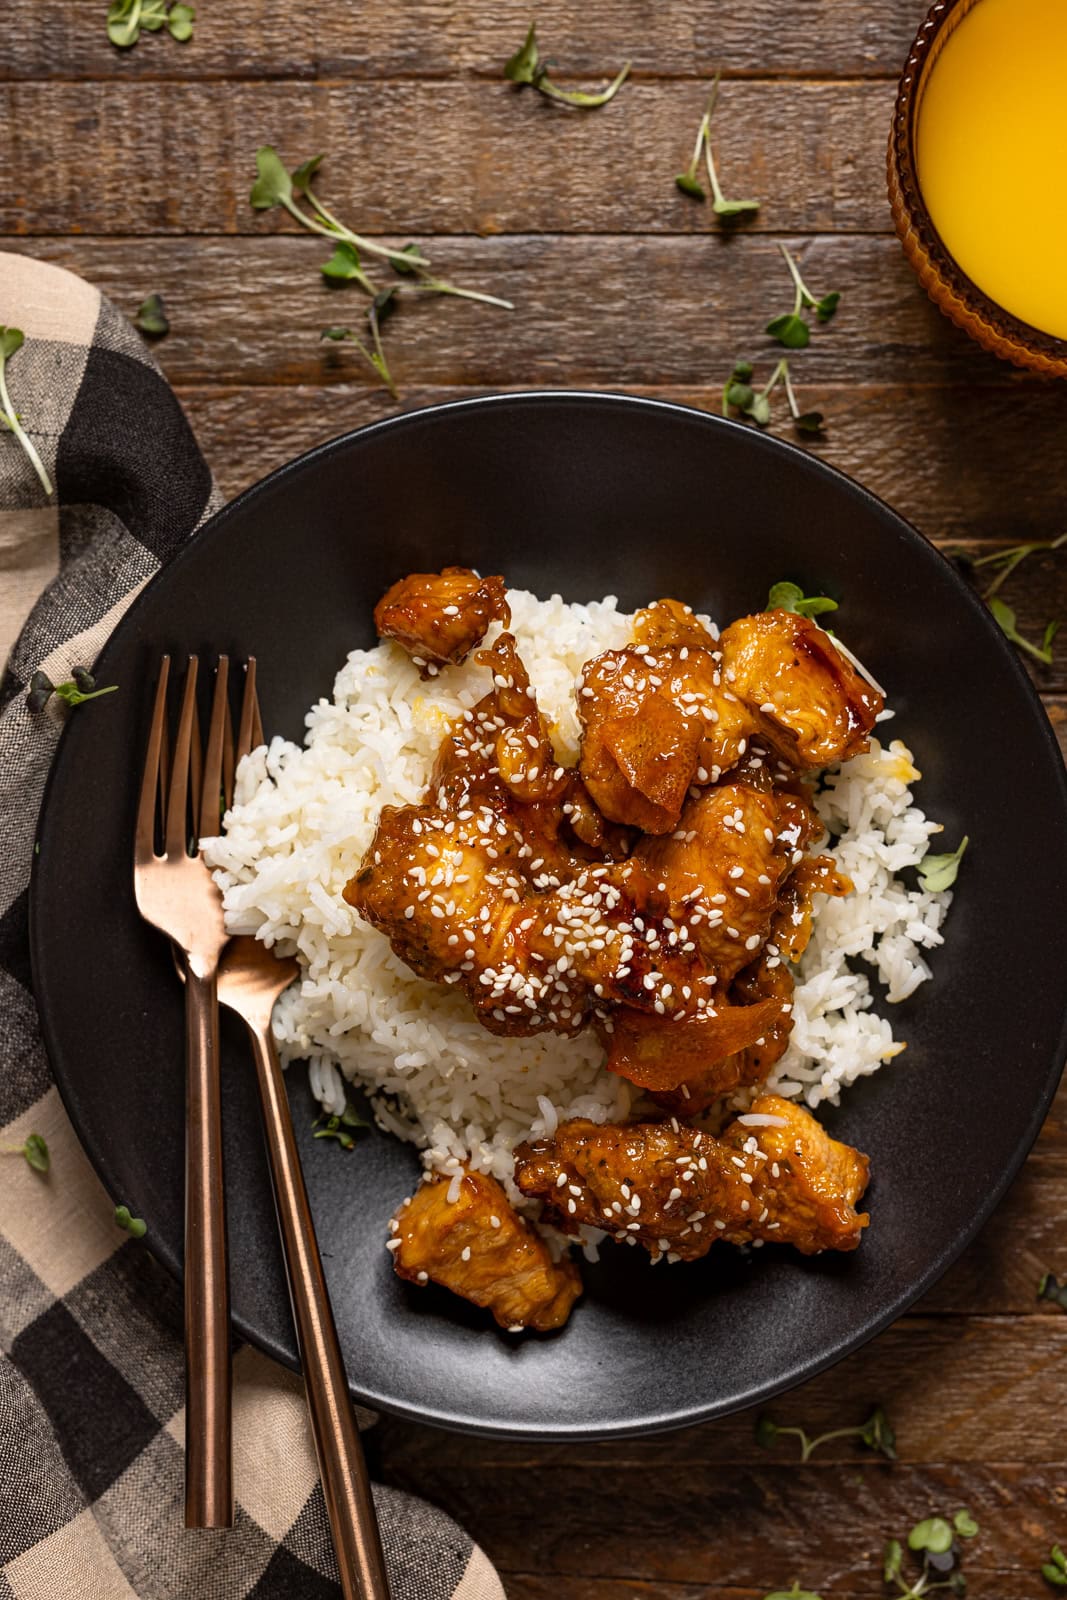 Orange chicken in a black plate with forks and juice.